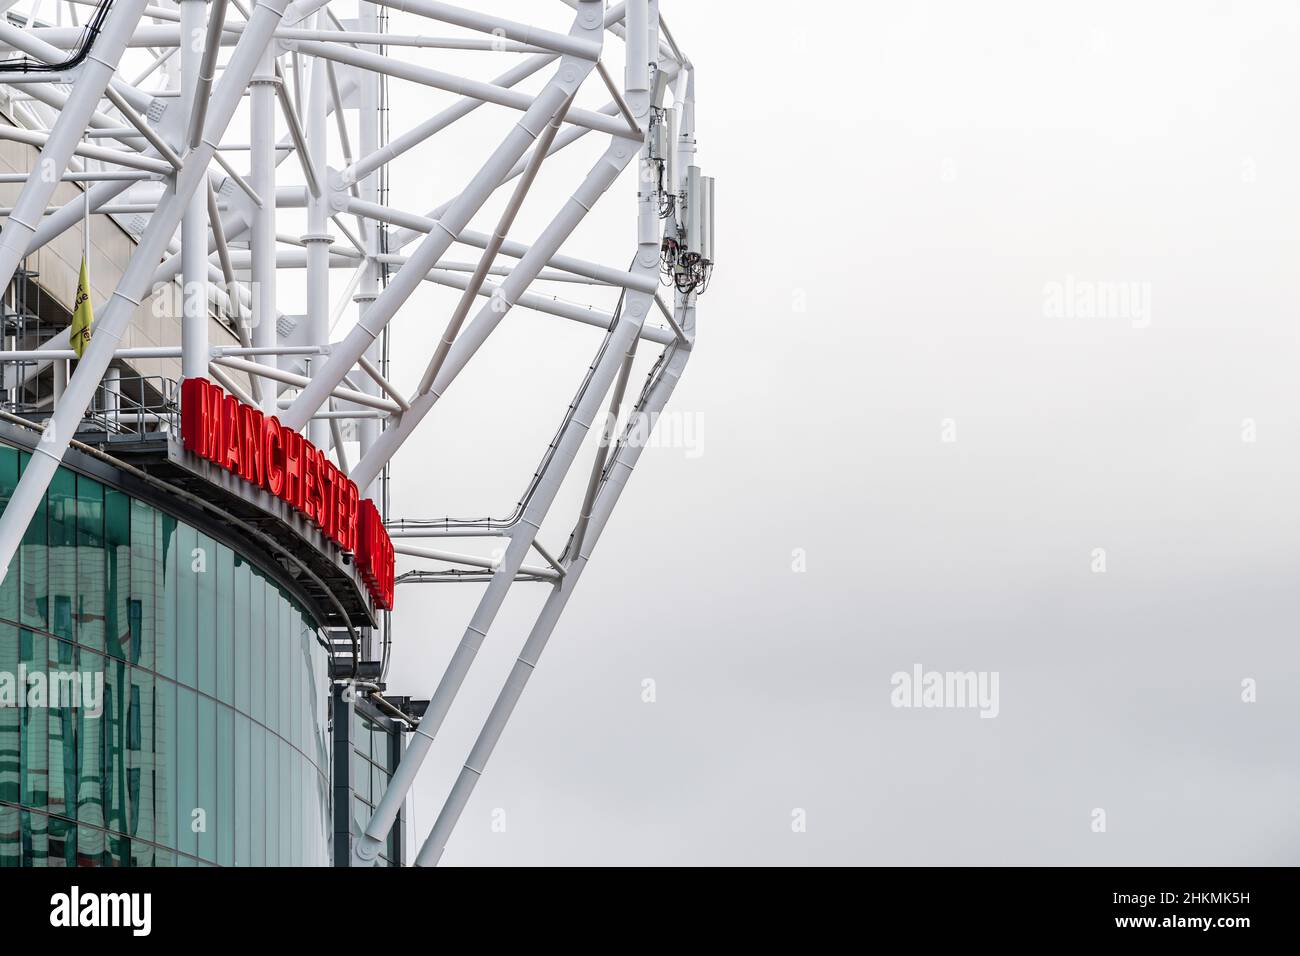 Old Trafford football ground, home to Manchester United FC. Stock Photo